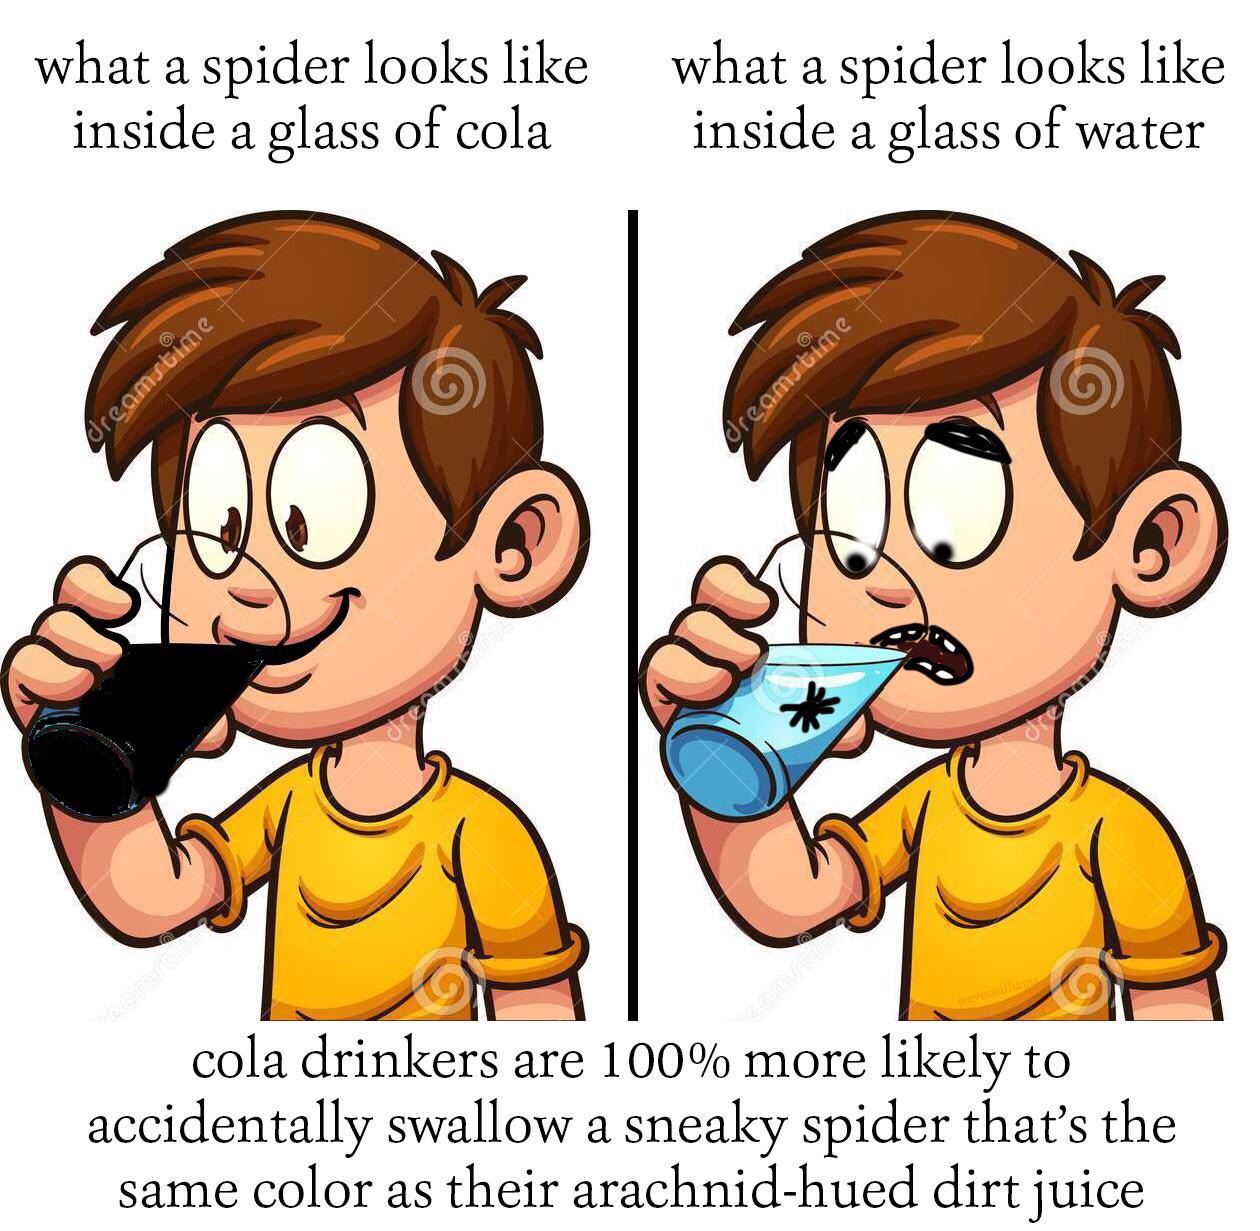 cartoon - what a spider looks inside a glass of cola what a spider looks inside a glass of water dreamstime dreamstime cola drinkers are 100% more ly to accidentally swallow a sneaky spider that's the same color as their arachnidhued dirt juice